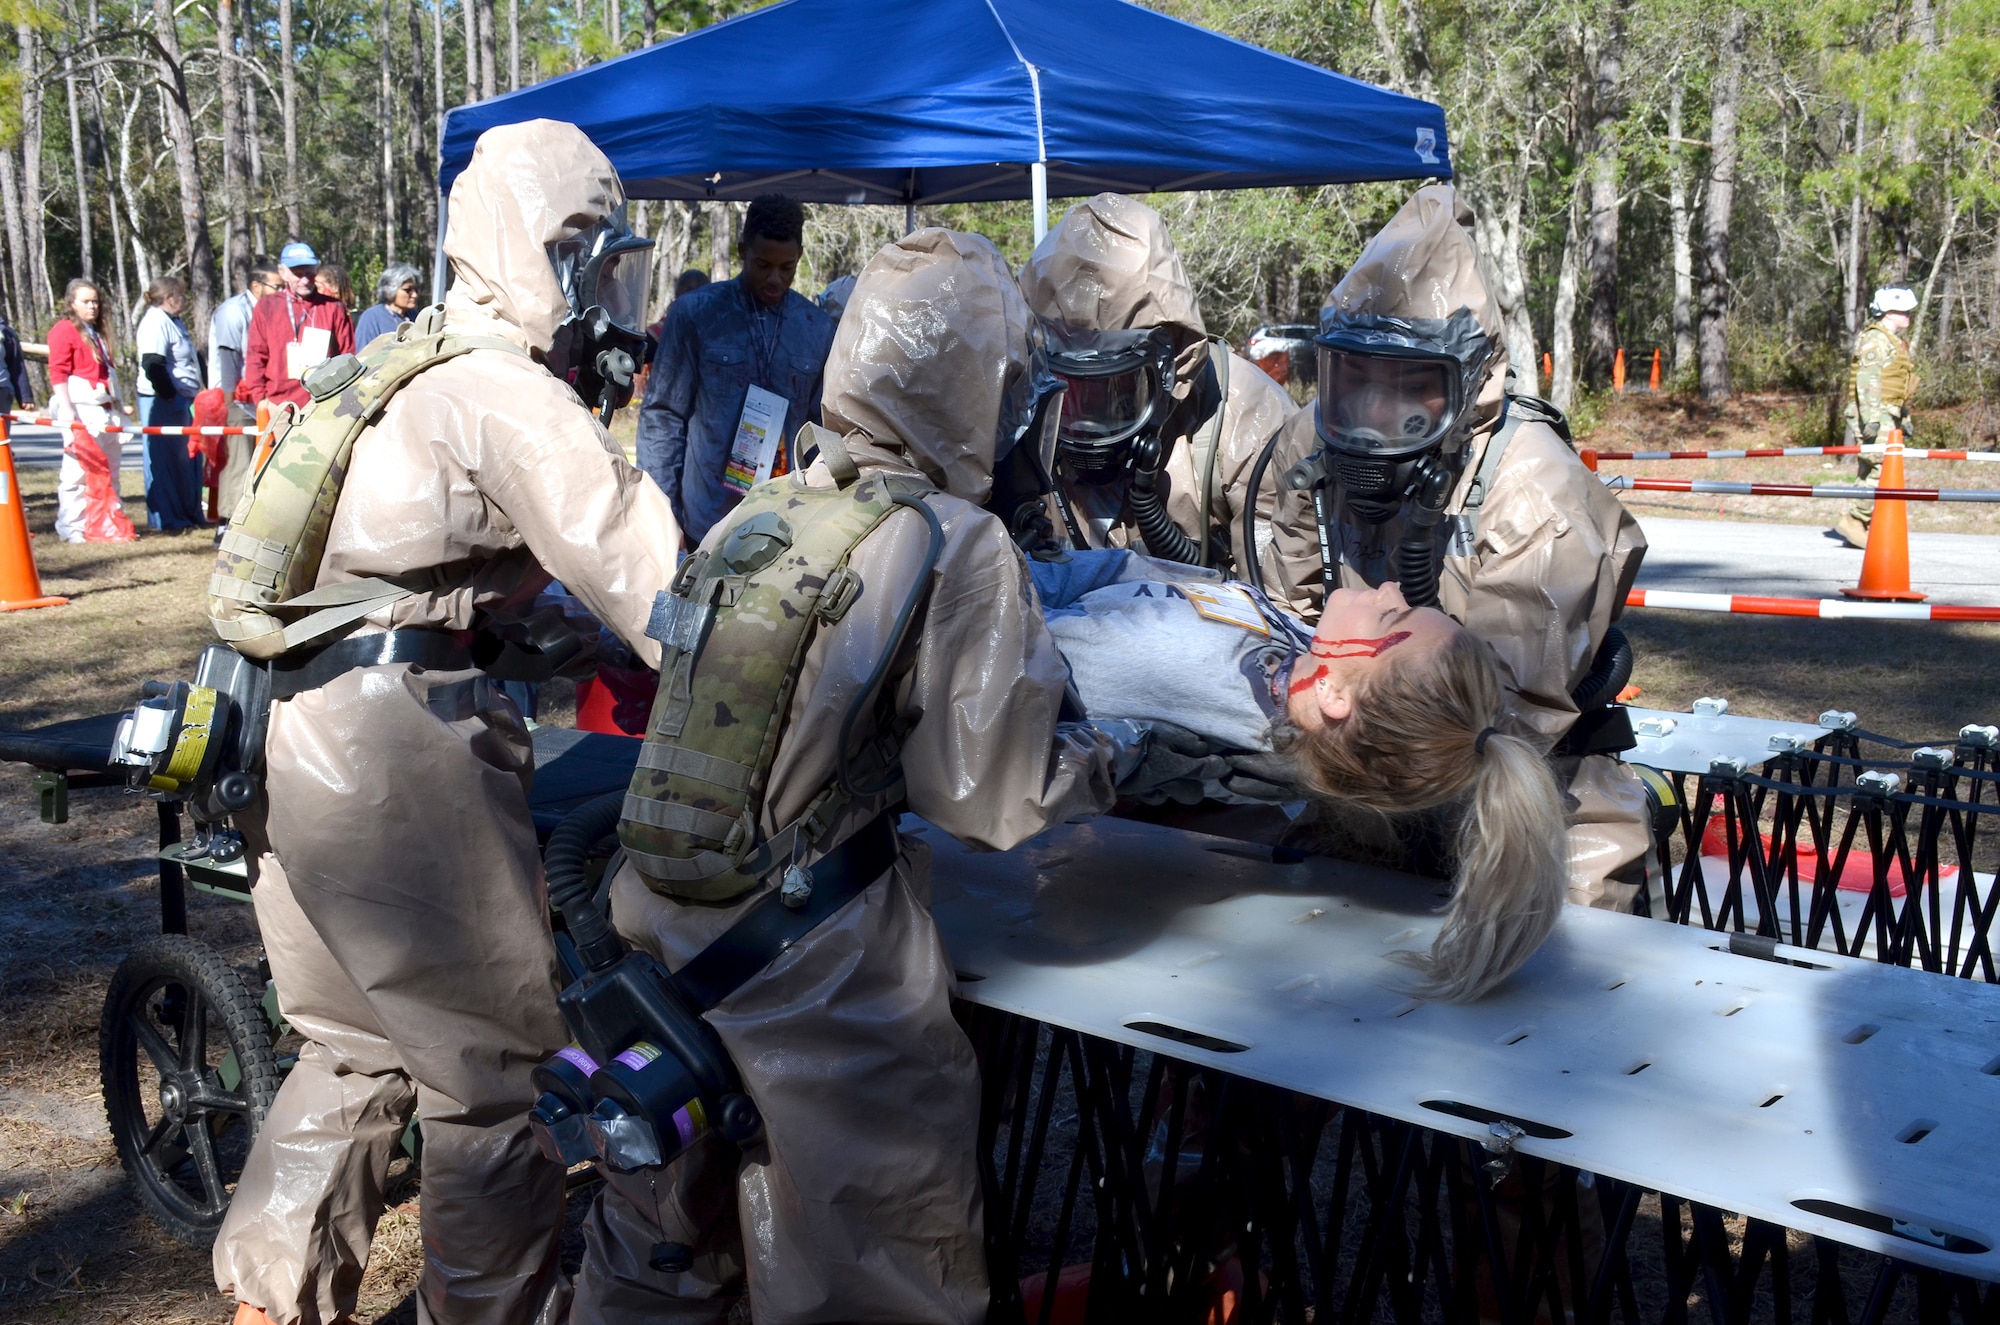 Guardsmen from Kentucky's CBRNE Enhanced Response Force Package, or CERFP, move a simulated victim from a litter to their decontamination station during an exercise evaluation at Camp Blanding, Fla., Jan. 10, 2019. The CERFP was tasked with responding to a 10-kiloton nuclear explosion, establishing a support zone, searching the hot zone for victims, extracting and decontaminating the victims, and providing medical assistance. (U.S. Army National Guard photo by Sgt. Taylor Tribble)